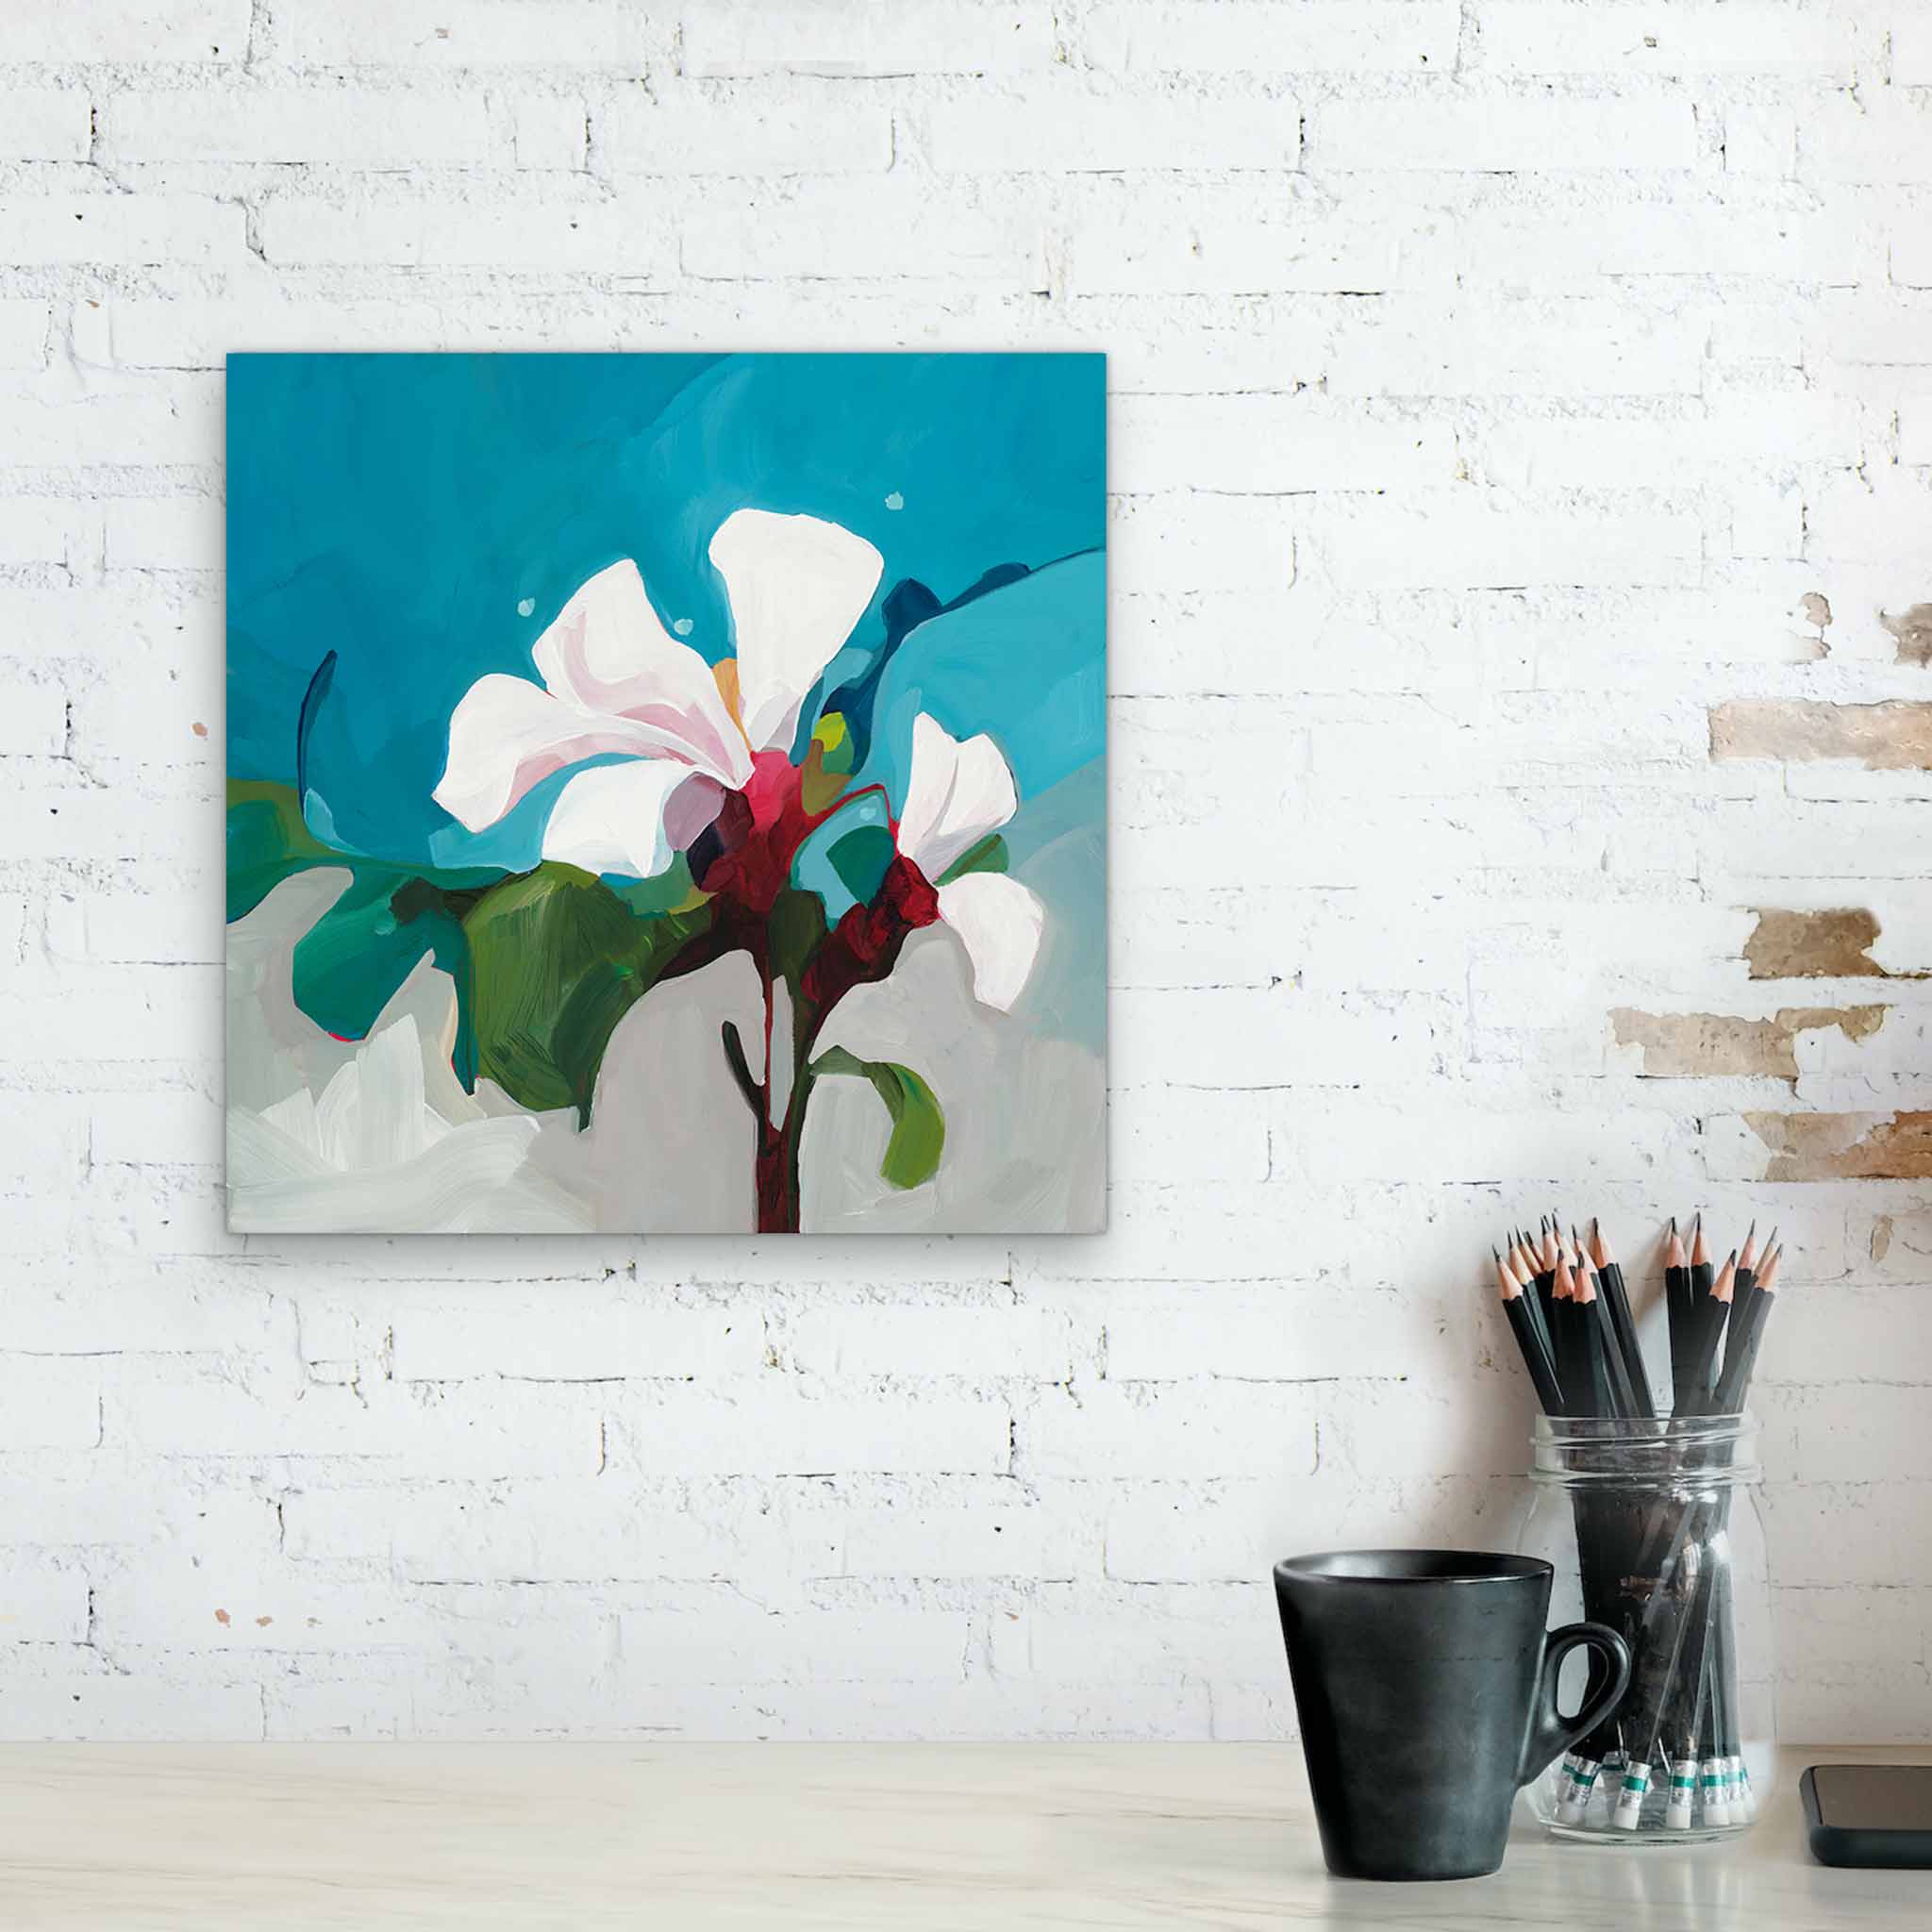 acrylic flower painting teal